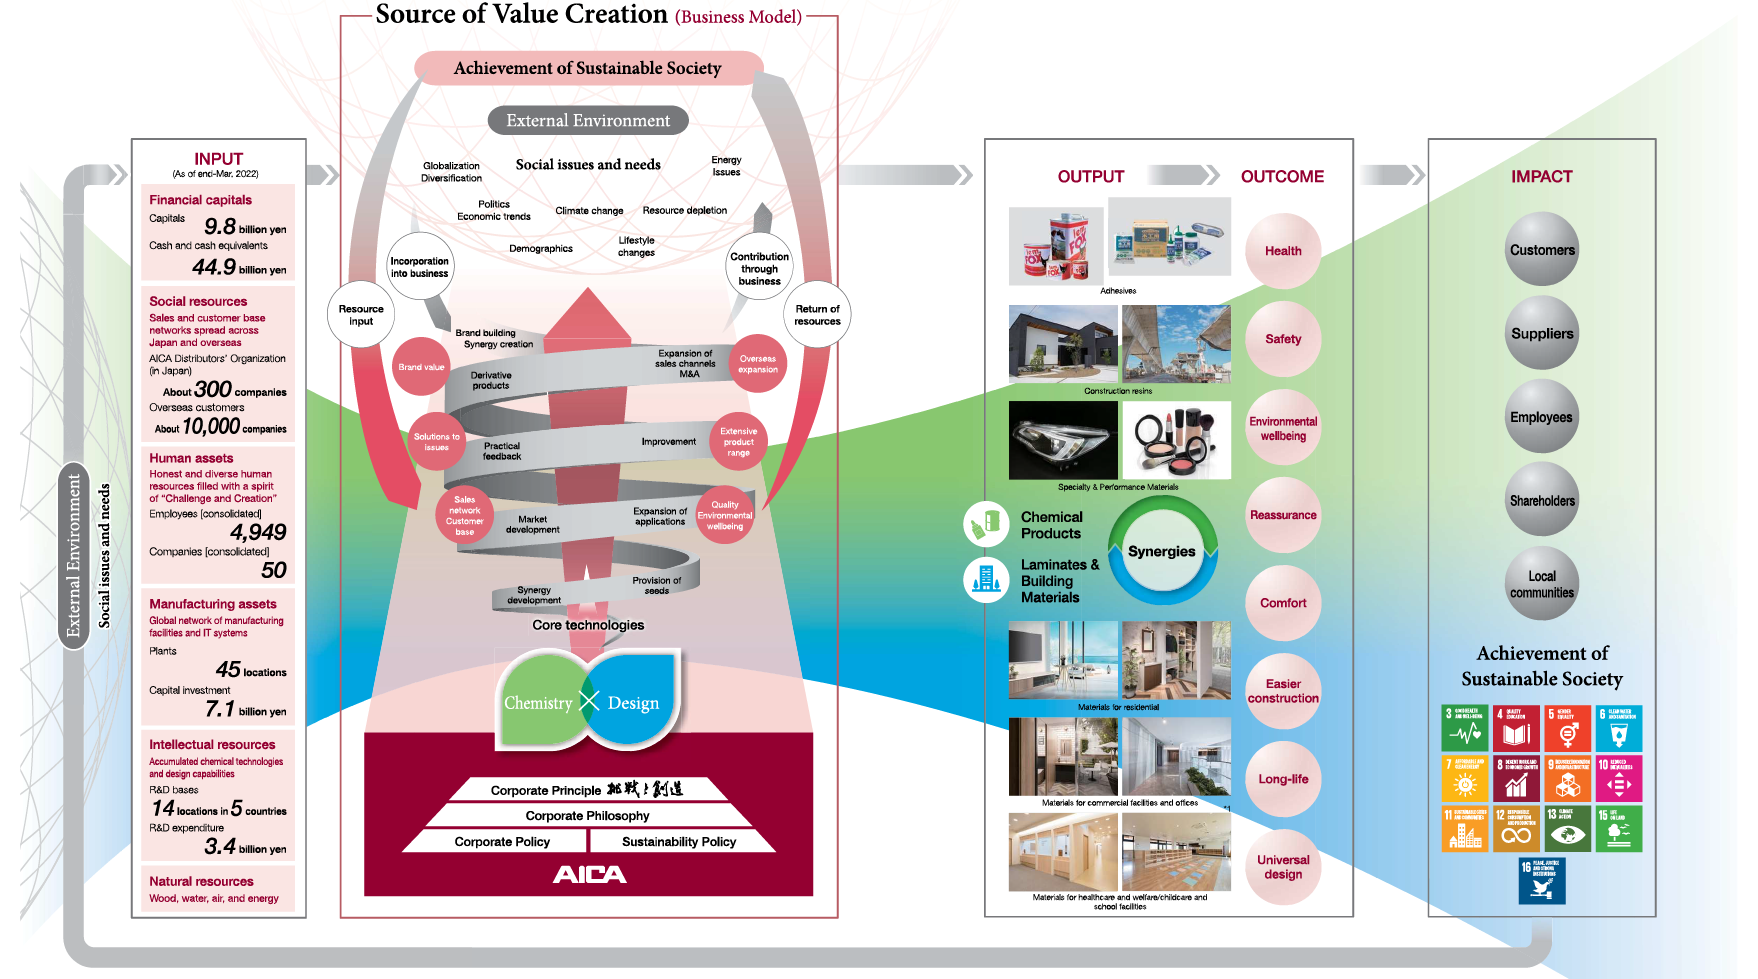 Picture of AICA’s Value Creation Model